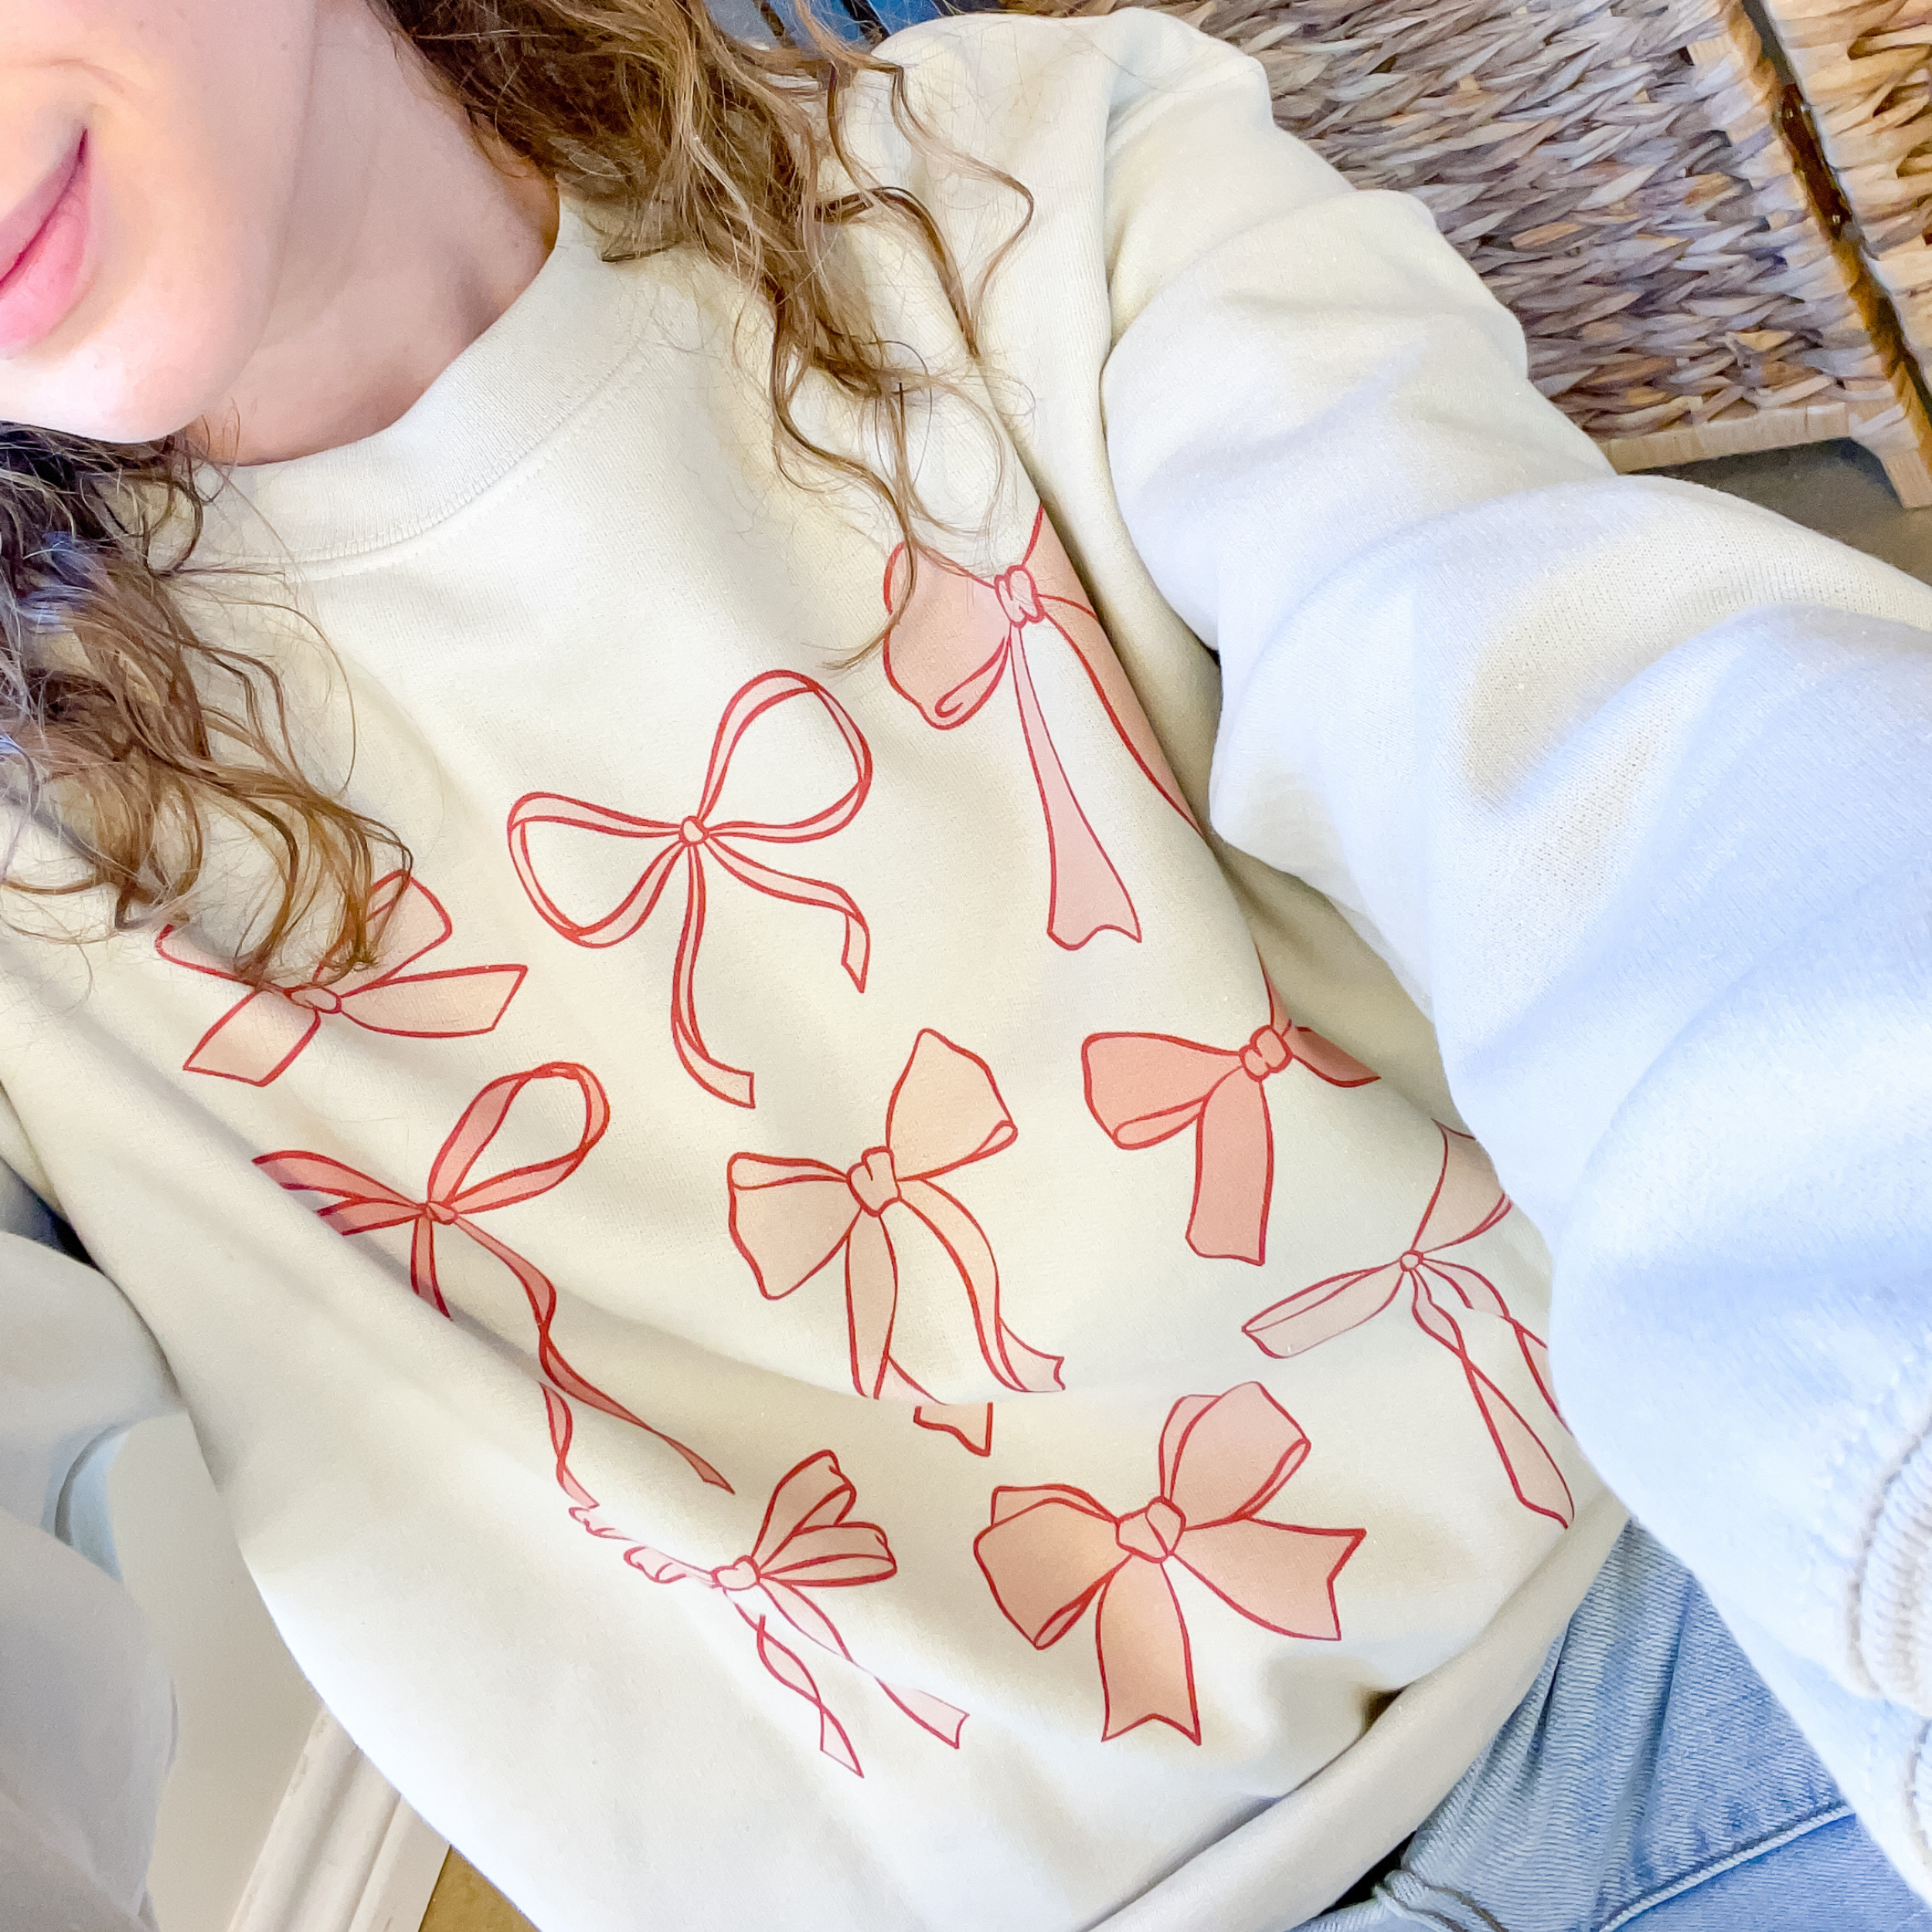 Online Exclusive | Coquette Bow Long Sleeve Graphic Sweatshirt in Cream - Giddy Up Glamour Boutique